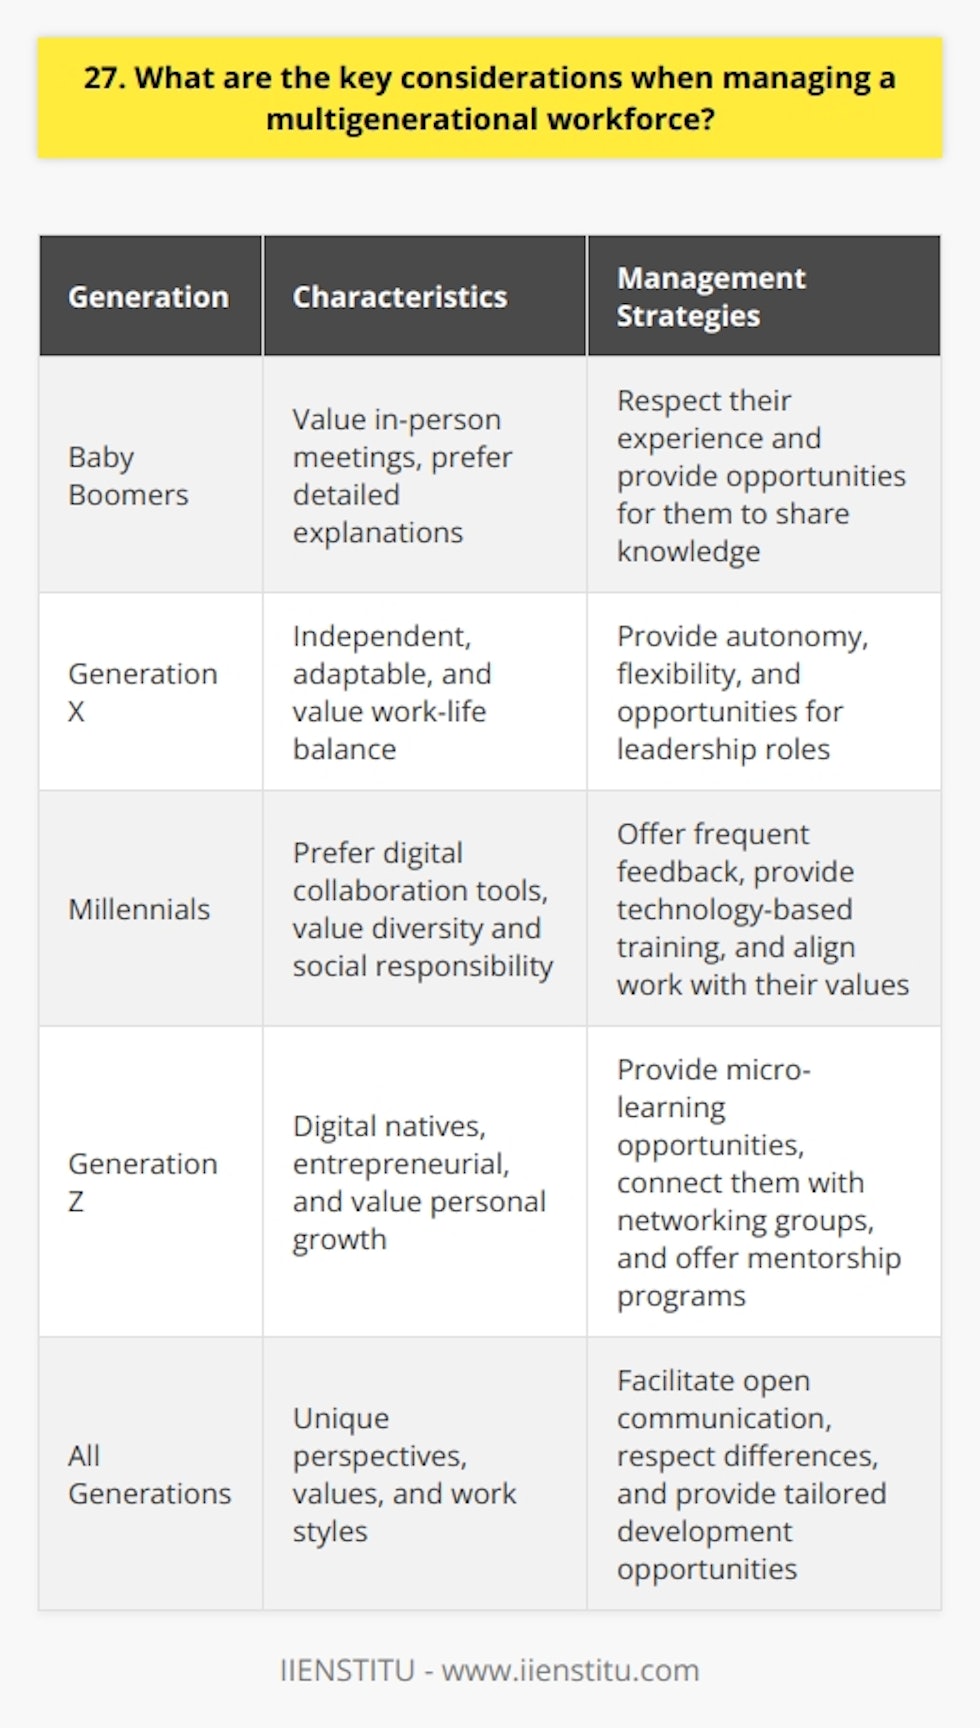 When managing a multigenerational workforce, there are several key considerations I always keep in mind. Recognize and Respect Differences Each generation brings unique perspectives, values, and work styles. I strive to understand and appreciate these differences. For example, when I led a team with both Baby Boomers and Millennials, I learned that the Boomers preferred in-person meetings while the Millennials favored digital collaboration tools. By respecting both preferences, we found a balance that worked for everyone. Facilitate Open Communication Clear communication is essential for bridging generational gaps. I encourage open dialogue and actively listen to each team member. In one memorable project, I noticed some tension between an older employee and a younger new hire. By facilitating an honest discussion, we uncovered that the problem stemmed from different communication styles. The older employee preferred detailed explanations while the younger was used to brief, to-the-point messages. Once they understood each other better, they worked together much more smoothly. Provide Tailored Training and Development Different generations often have different learning preferences and career goals. I aim to provide customized training and development opportunities. When I mentored a Gen X employee looking to move into a leadership role, I recommended books and workshops that appealed to her learning style. For a Gen Z team member, I suggested online micro-courses and connected him with relevant networking groups. Seeing them grow and advance in their own ways has been incredibly rewarding. At the end of the day, harnessing the strengths of a multigenerational team takes effort and care, but the diverse ideas and approaches lead to amazing results. Im always excited to learn from colleagues of all ages and backgrounds. Together, we can achieve great things!